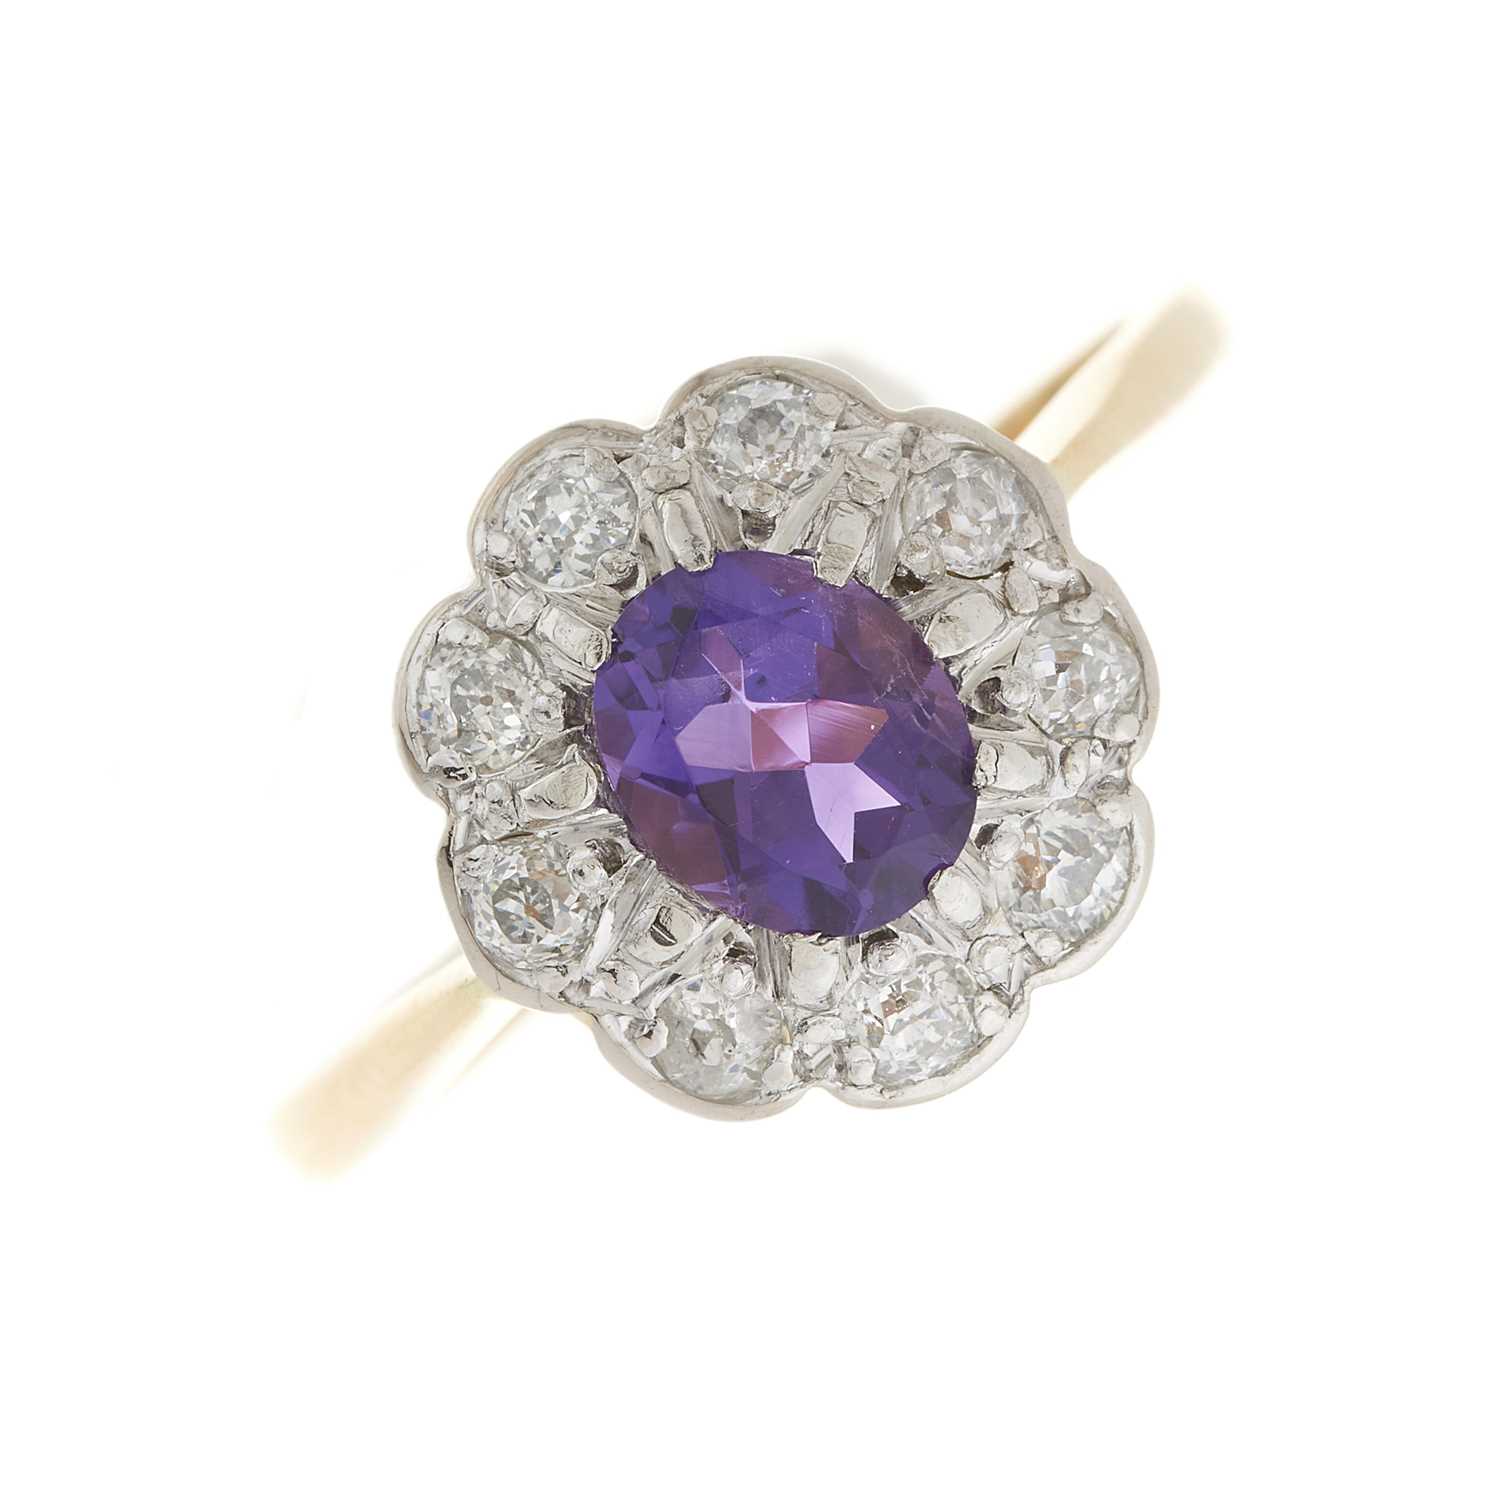 Lot 11 - An early 20th century 18ct gold amethyst and diamond cluster ring